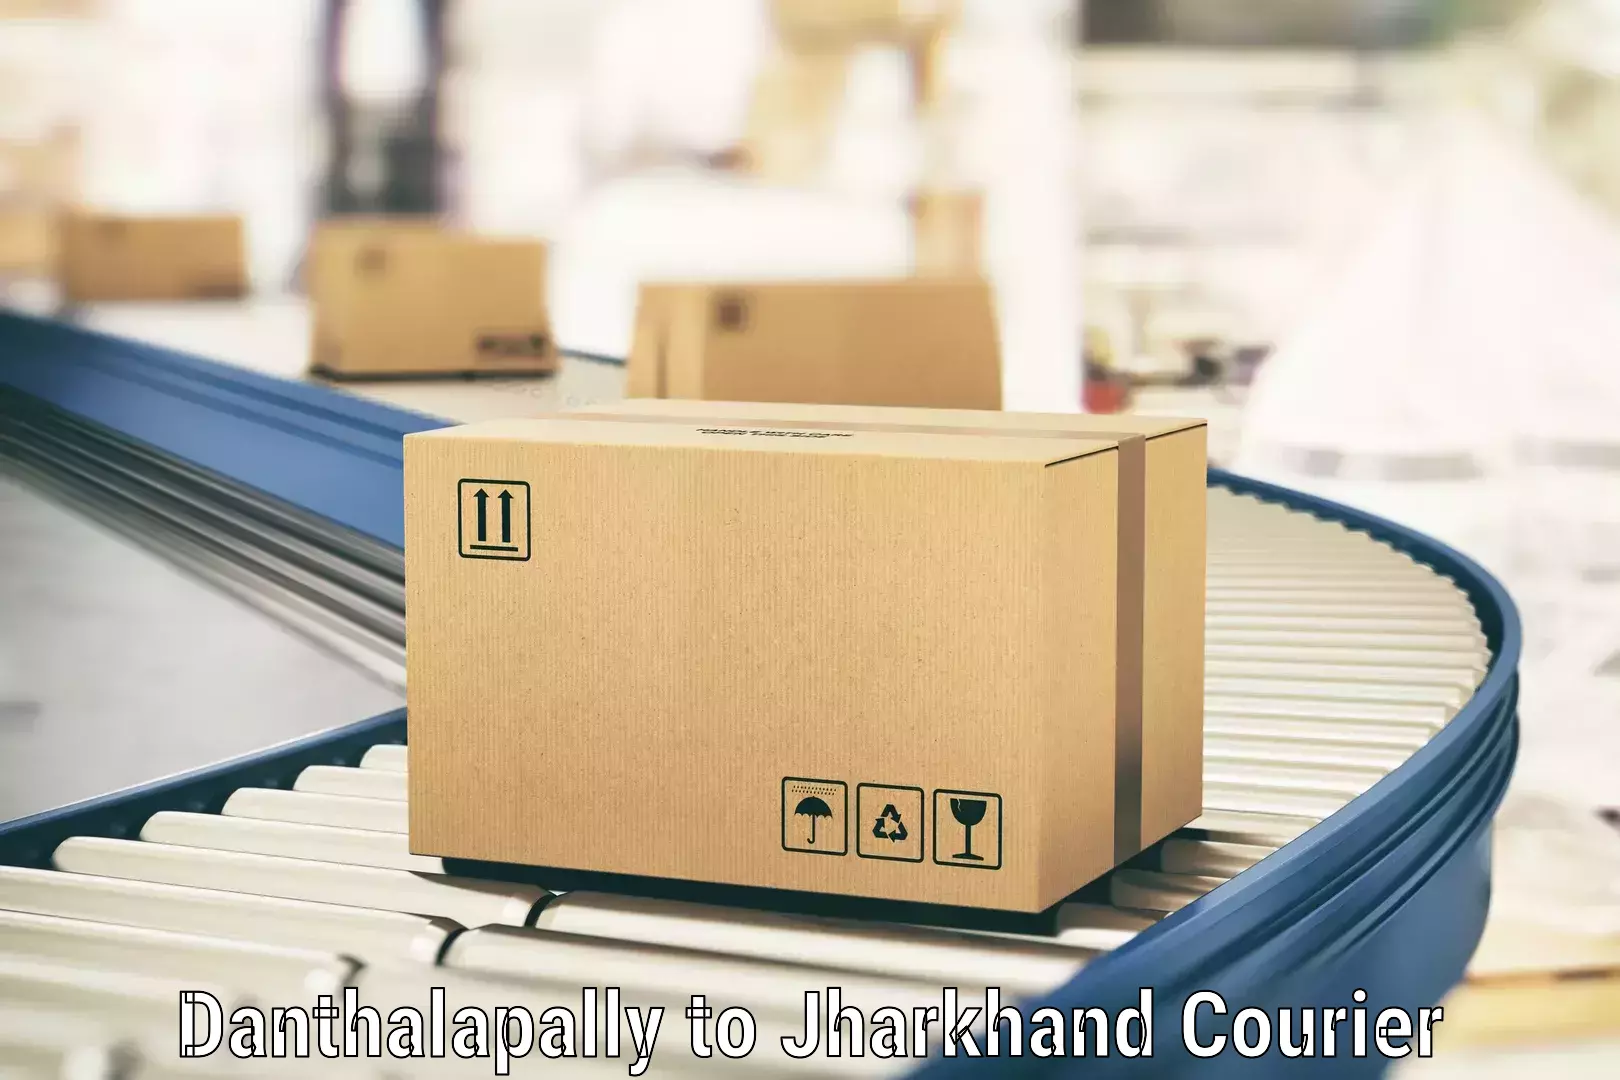 Courier service efficiency in Danthalapally to Chandankiyari